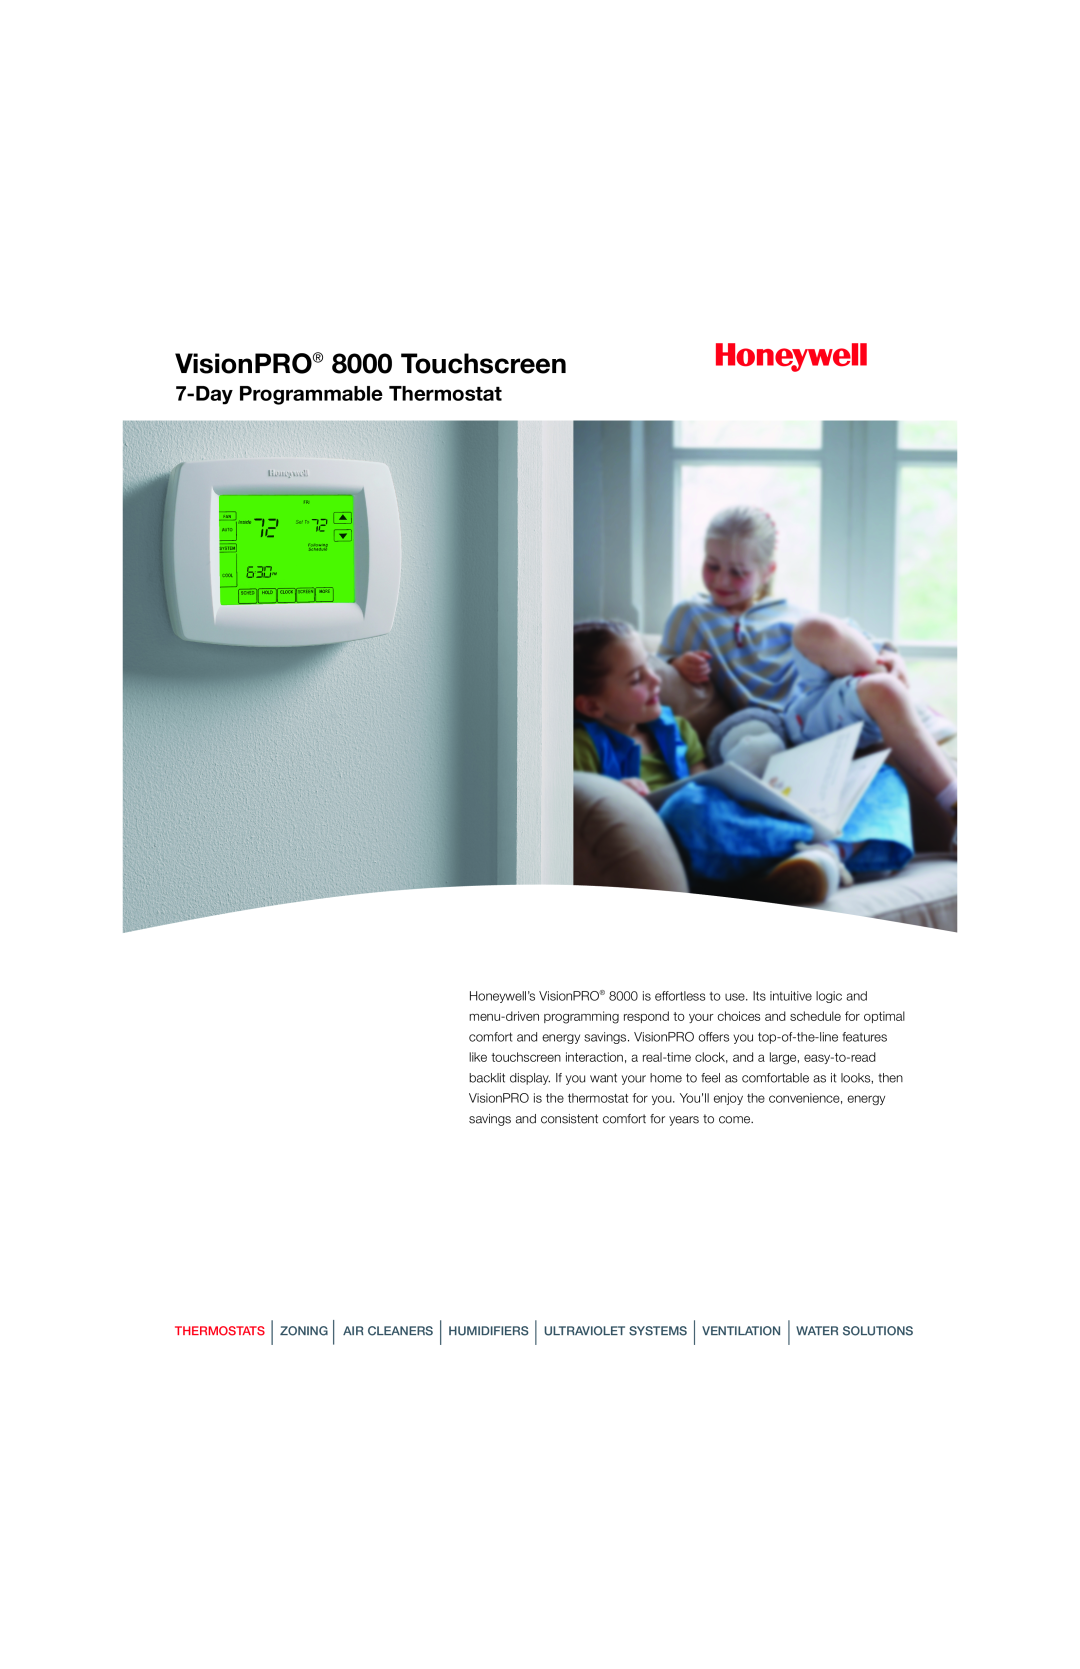 Honeywell manual VisionPRO 8000 Touchscreen, Day Programmable Thermostat 